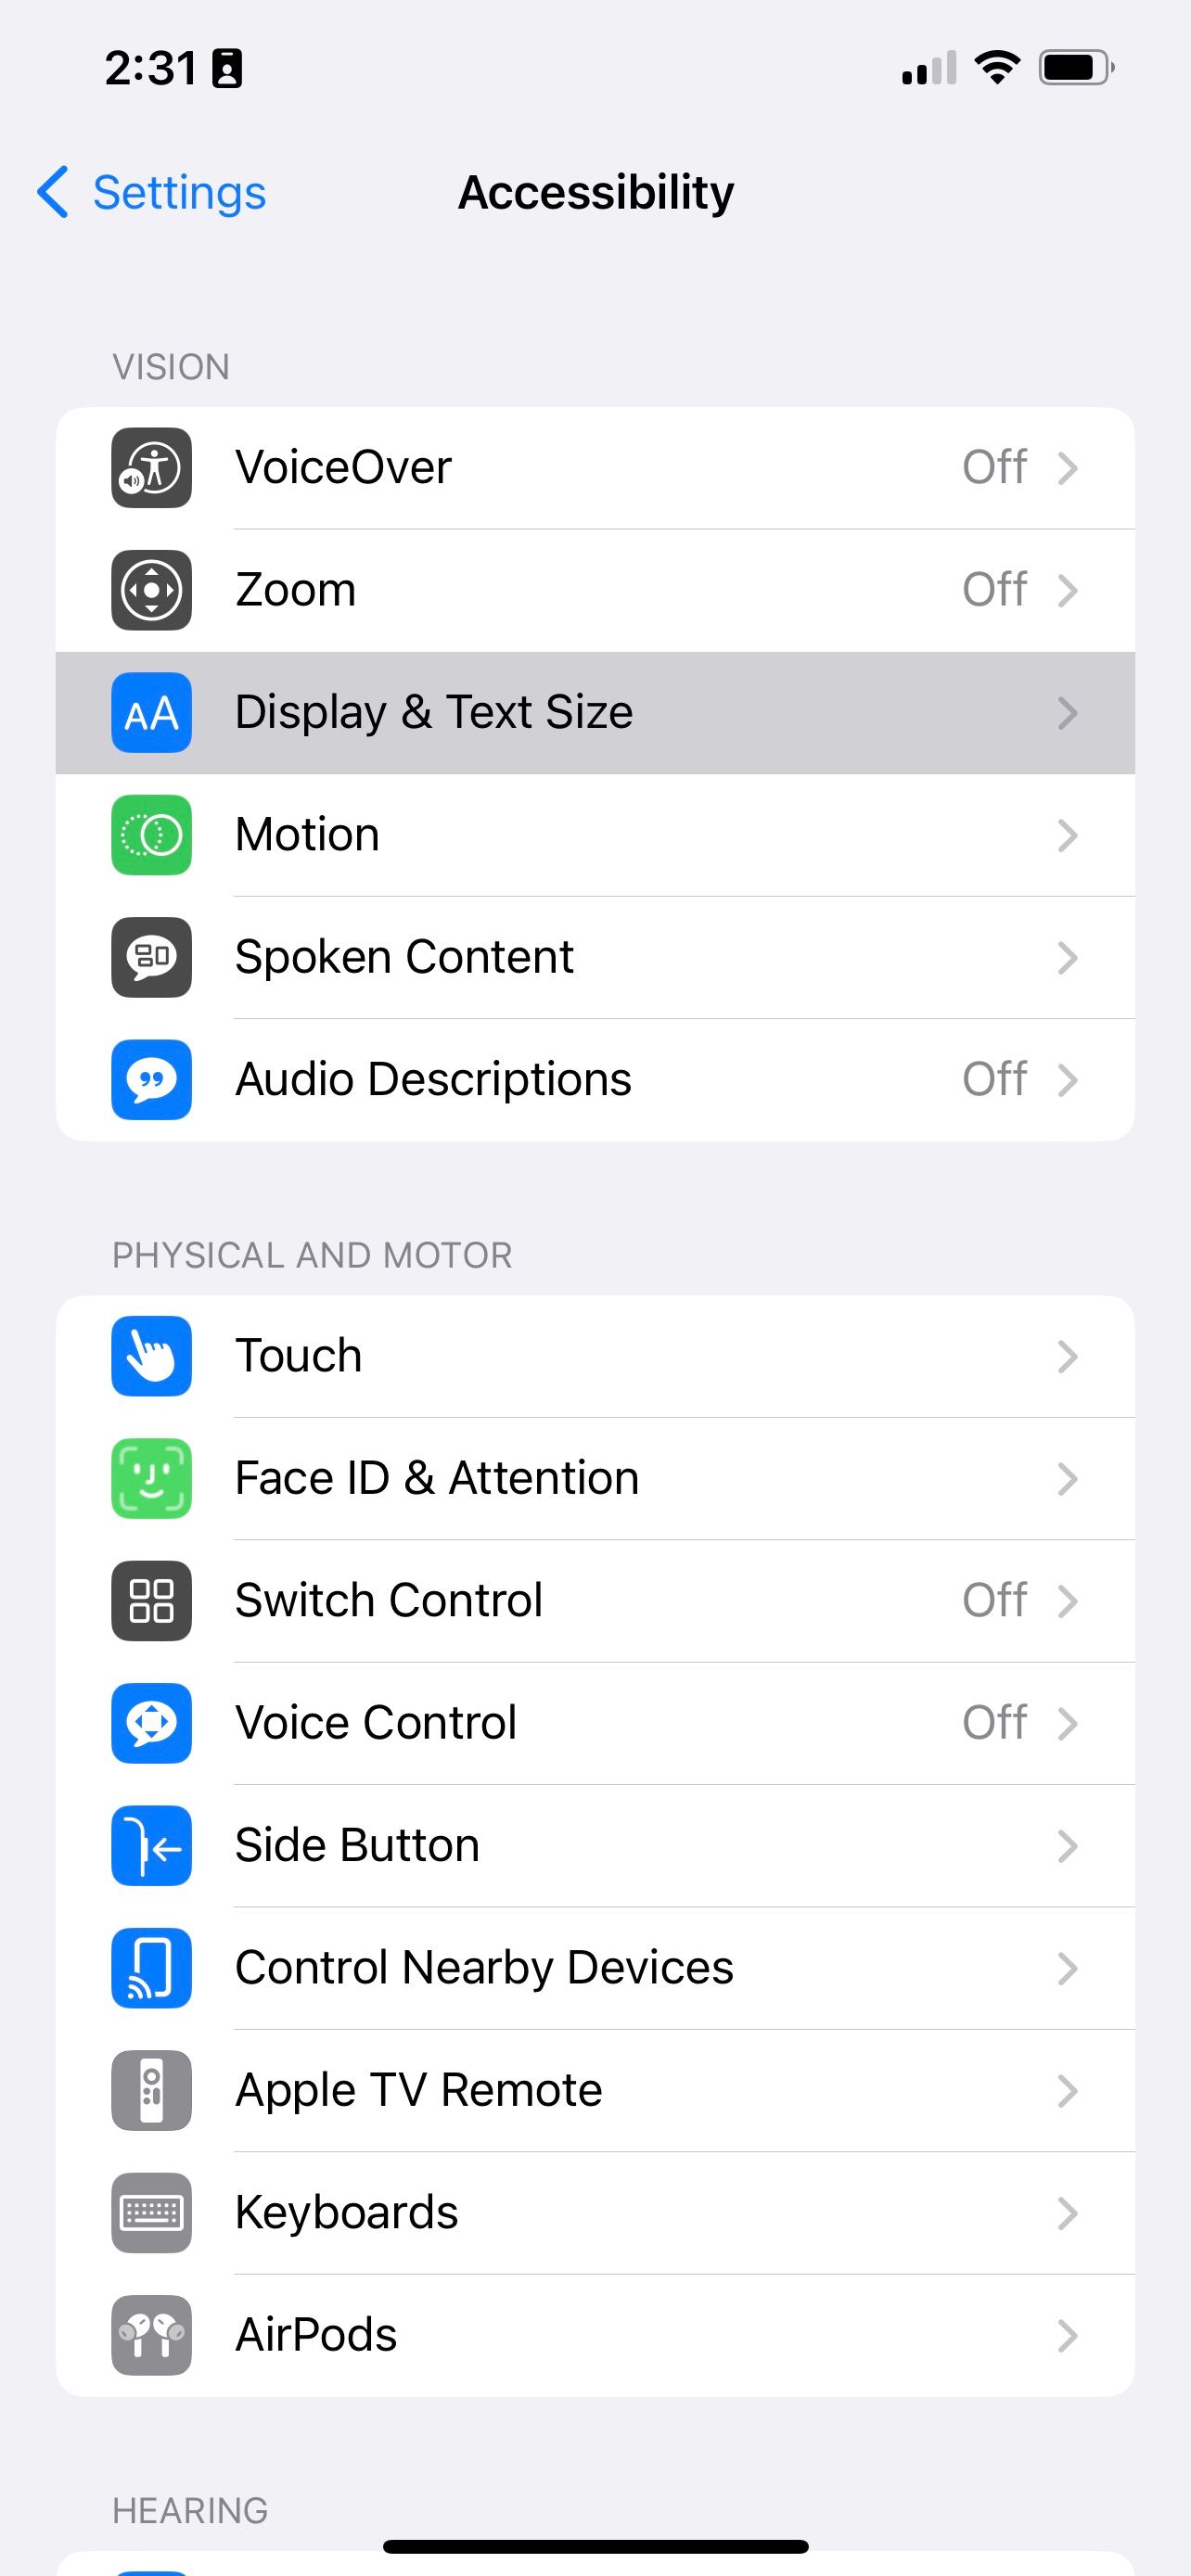 Location of Diplay & Text Size setting in iPhone accessibility